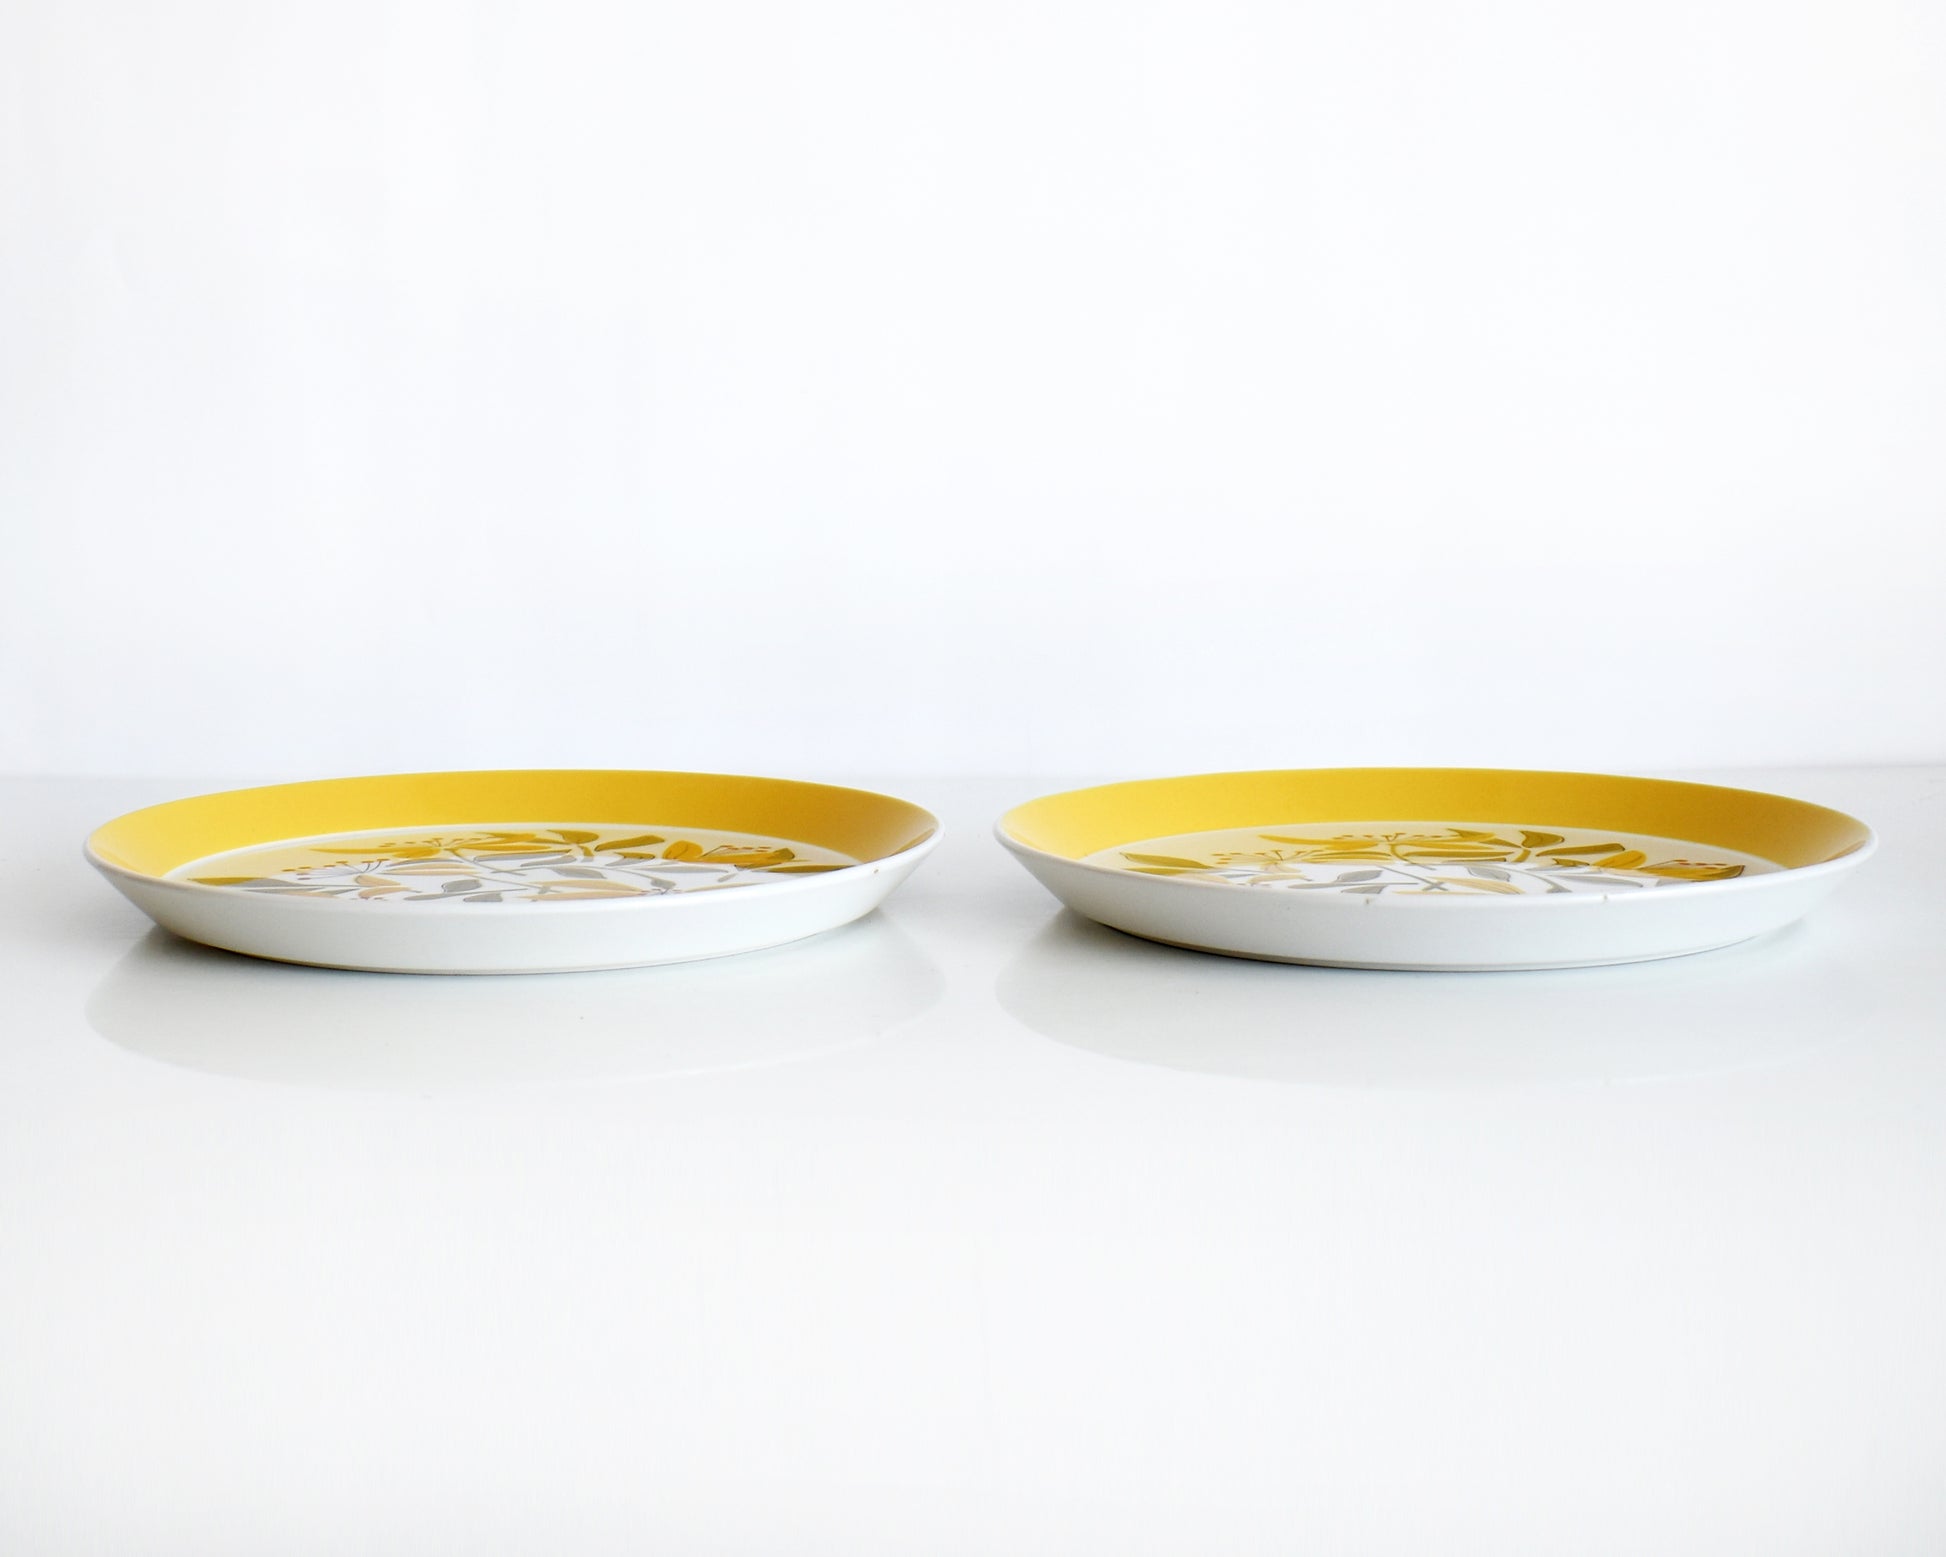 table view of two vintage 1970s plates from Mikasa Duplex line “Sunny Glow” D3504 pattern, designed by Ben Seibel. The plates have a wide yellow brim with a yellow, green, and orange floral motif at the center.